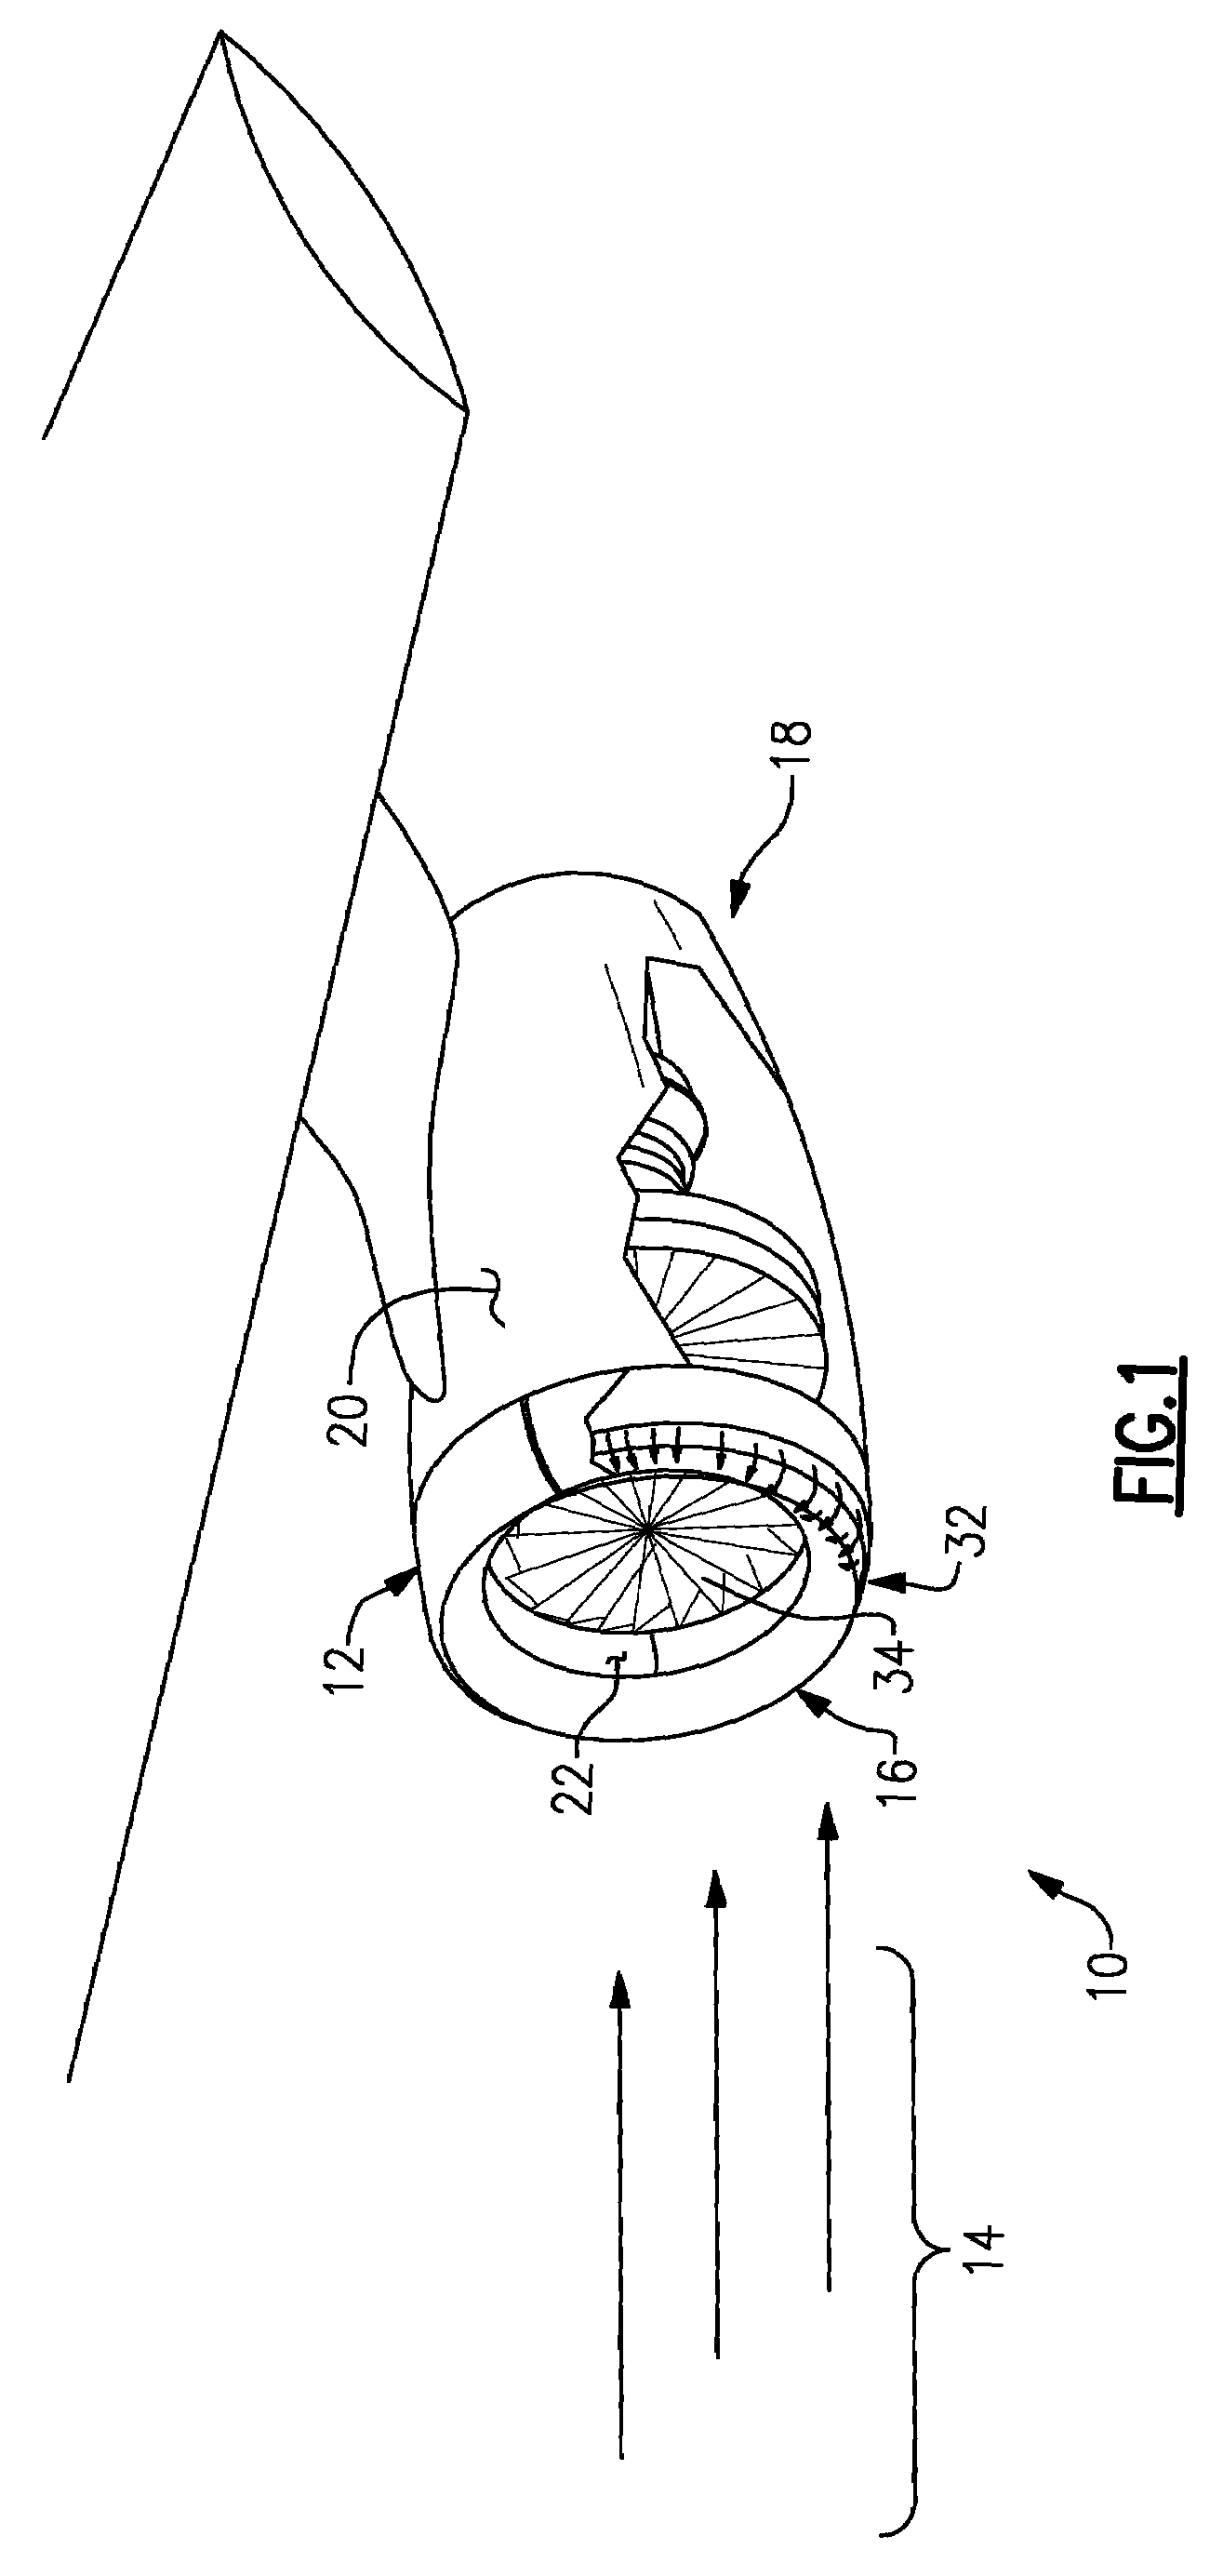 Flow distribution system for inlet flow control